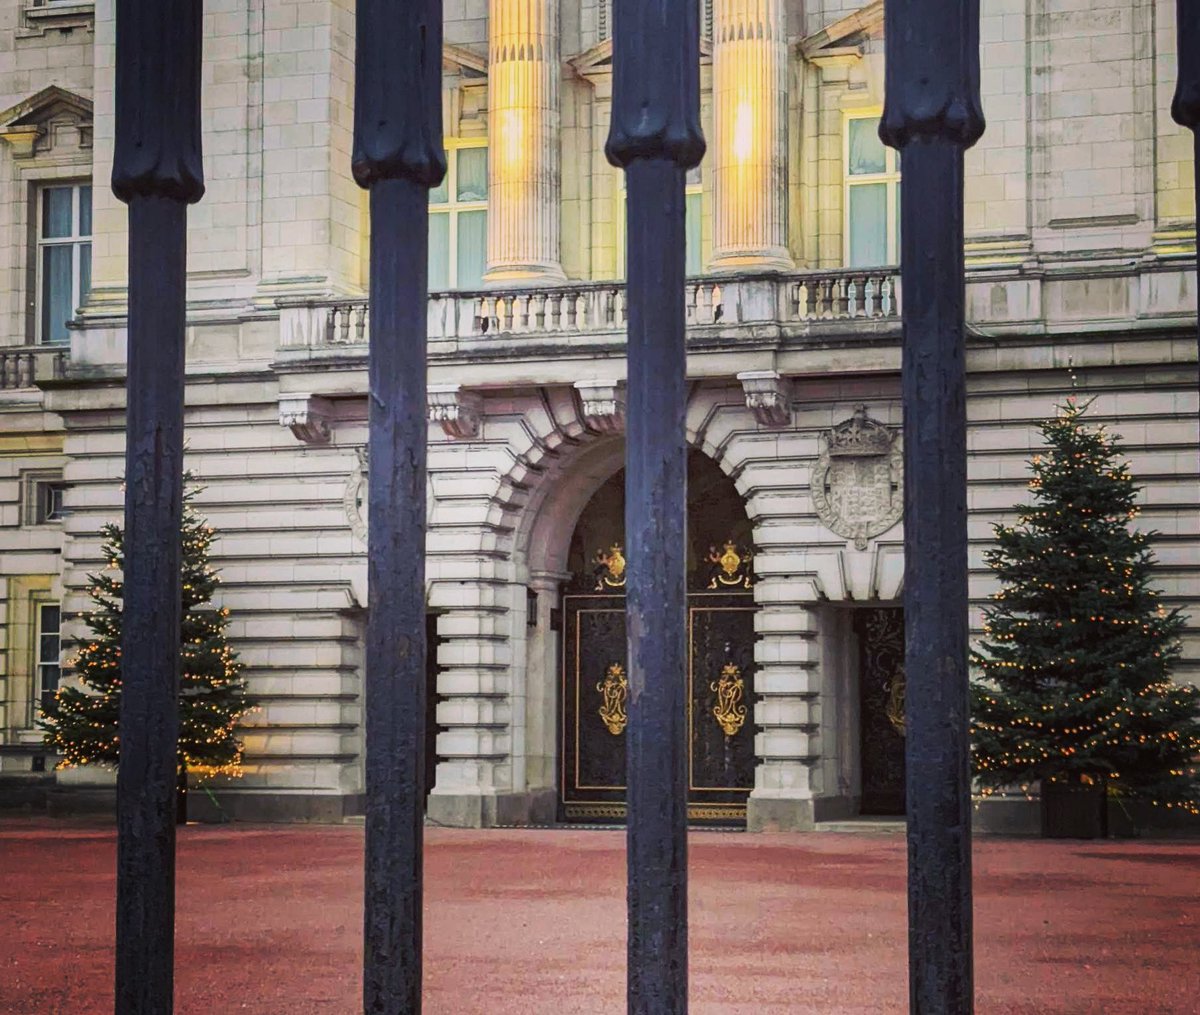 The Christmas trees outside Buckingham Palace are looking very beautiful! ✨

📸 © 9 Hertford Street

#london #londonchristmas #londonatchristmastime #christmasinlondon #buckinghampalace #londonroyalpalaces #londonsroyalpalaces #royalfamily #britishroyalfamily #kingcharles